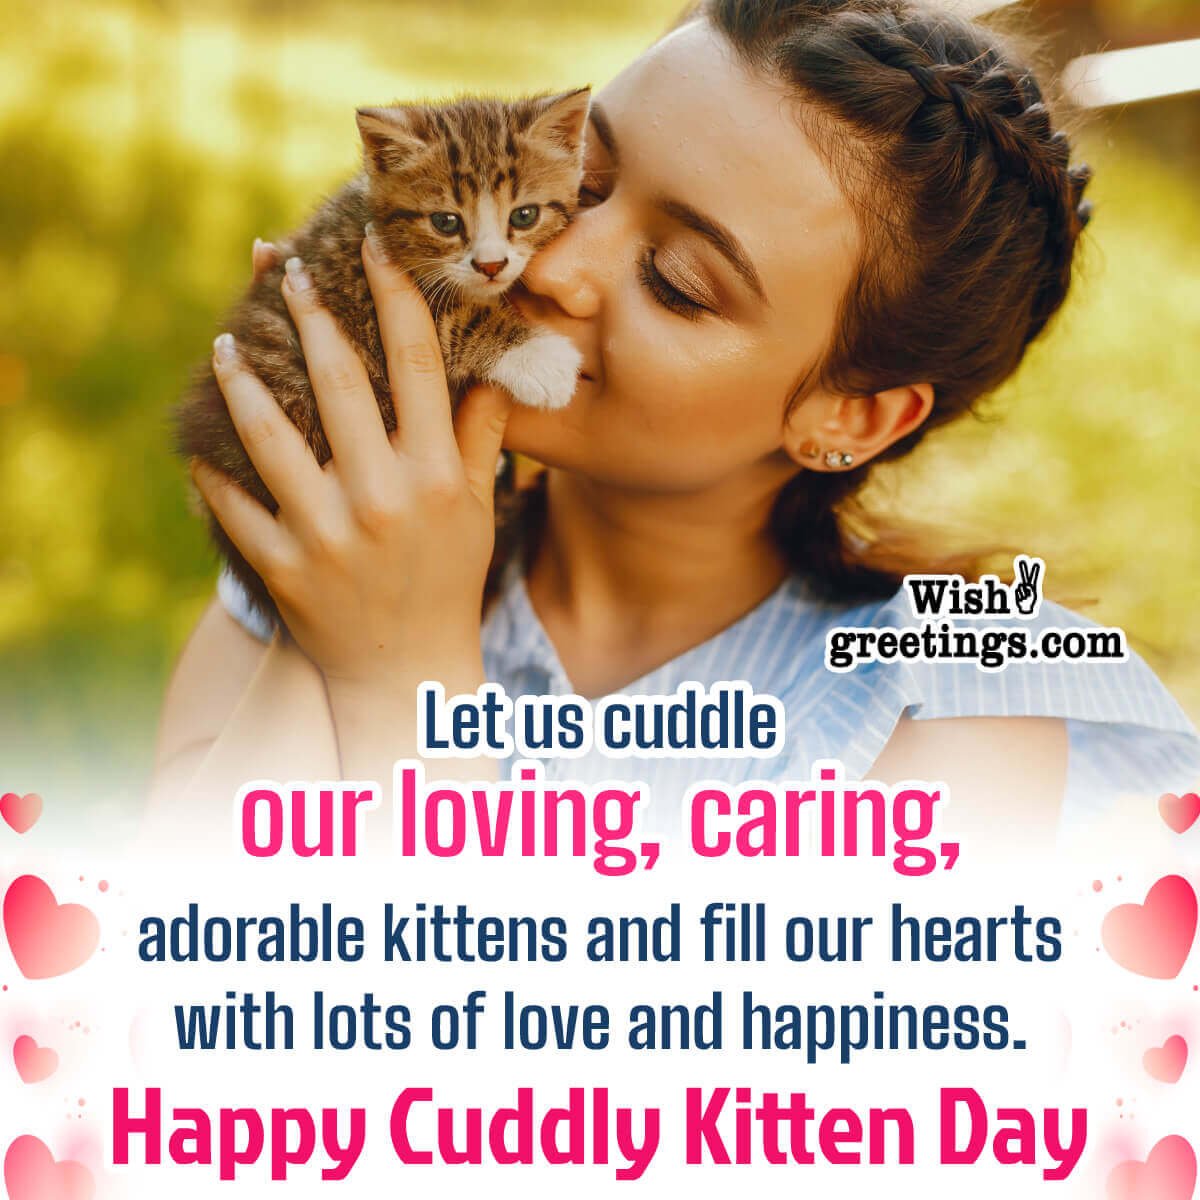 Happy Cuddly Kitten Day Message Pic